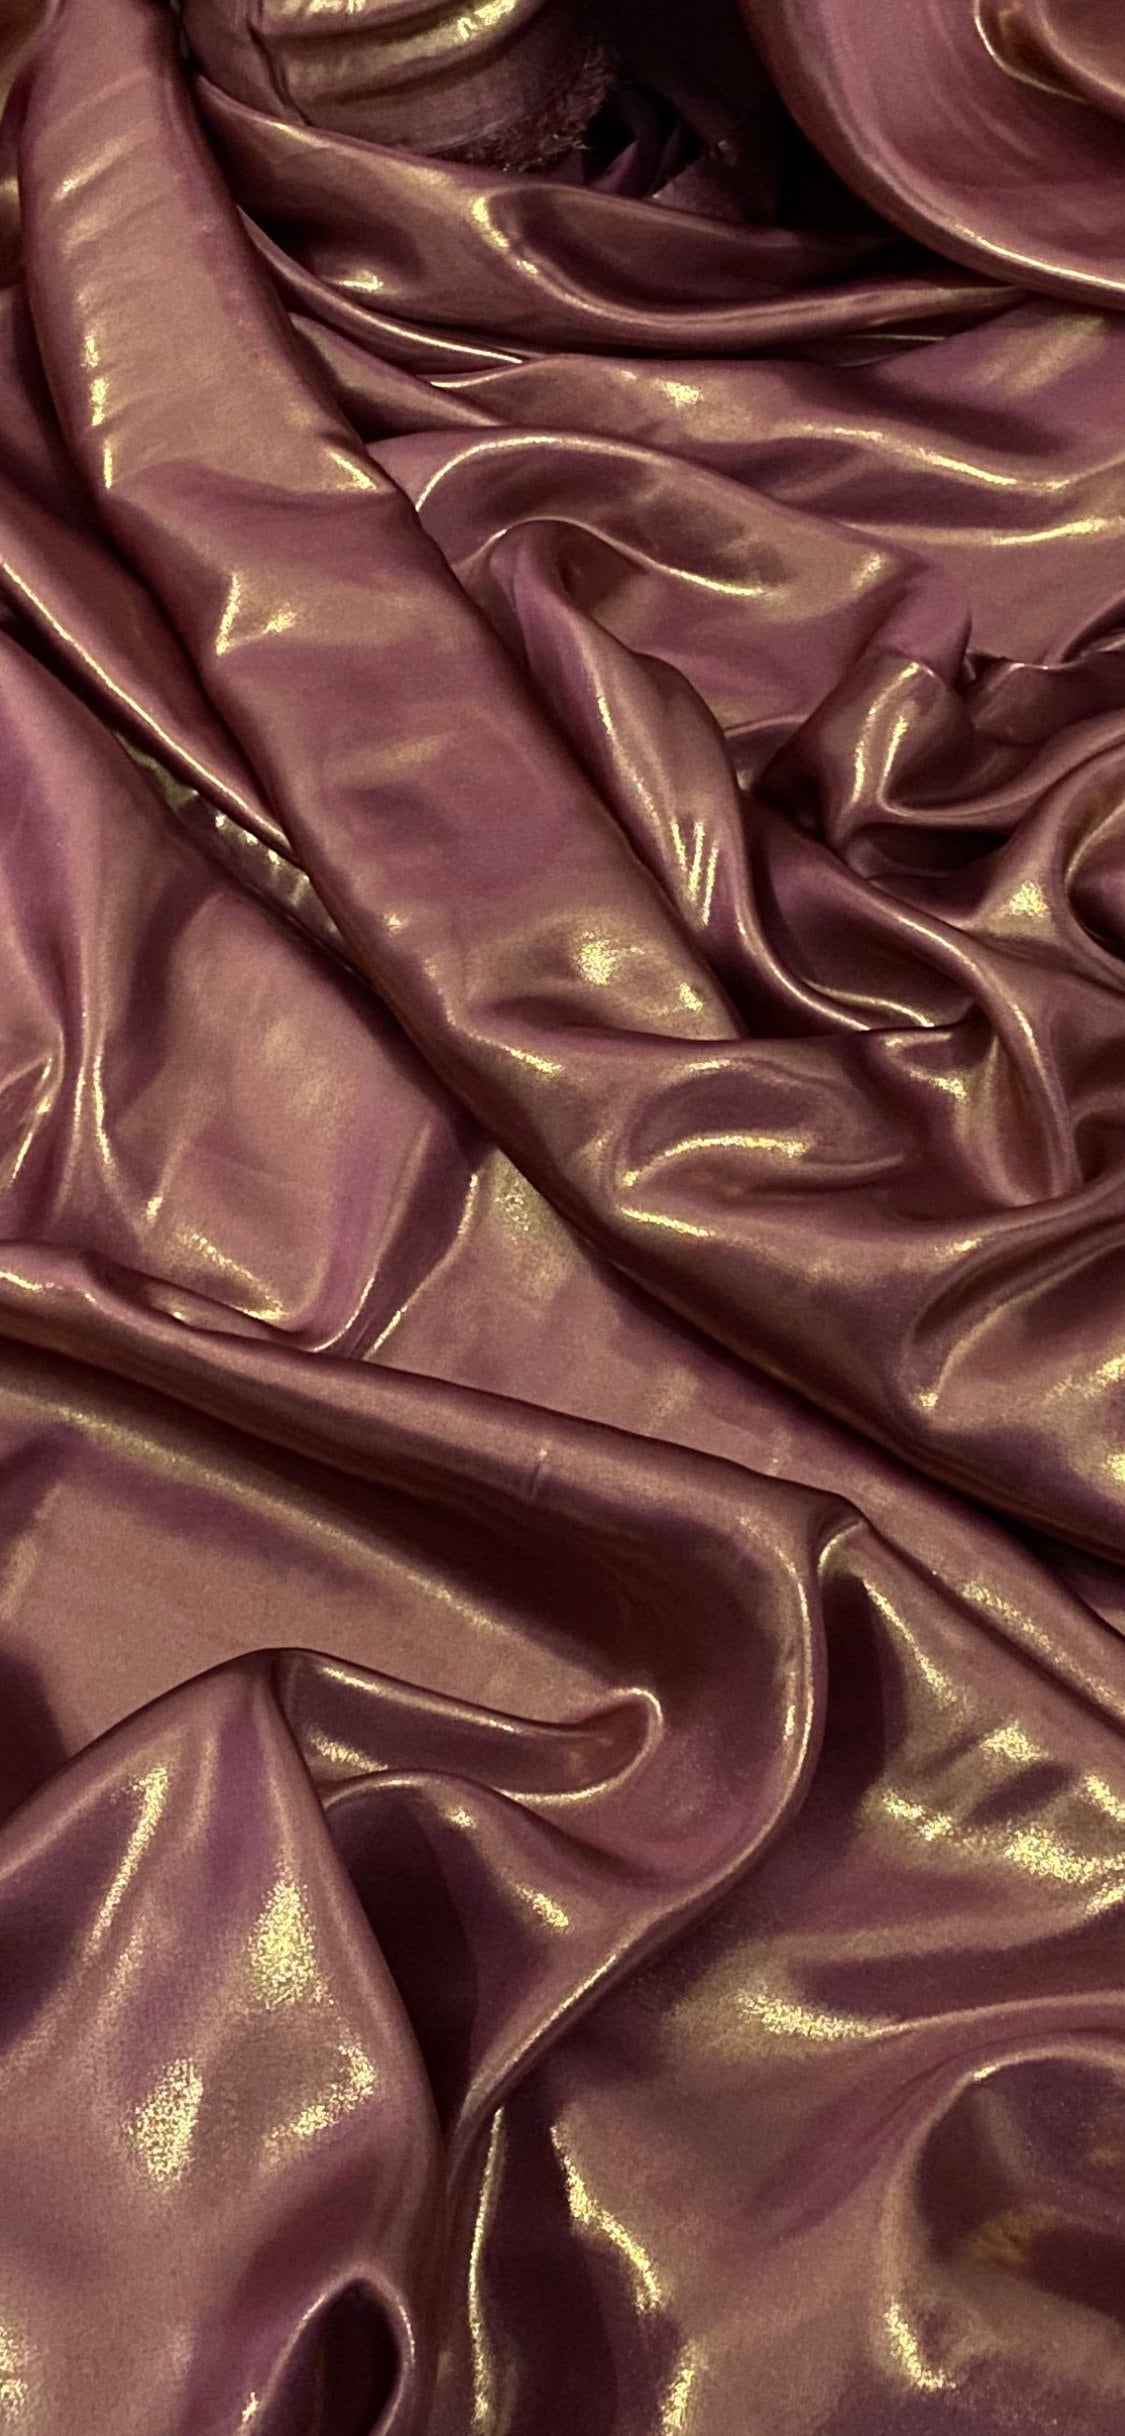 Pink Super Shimmer Satin Fabric by Casa Collection